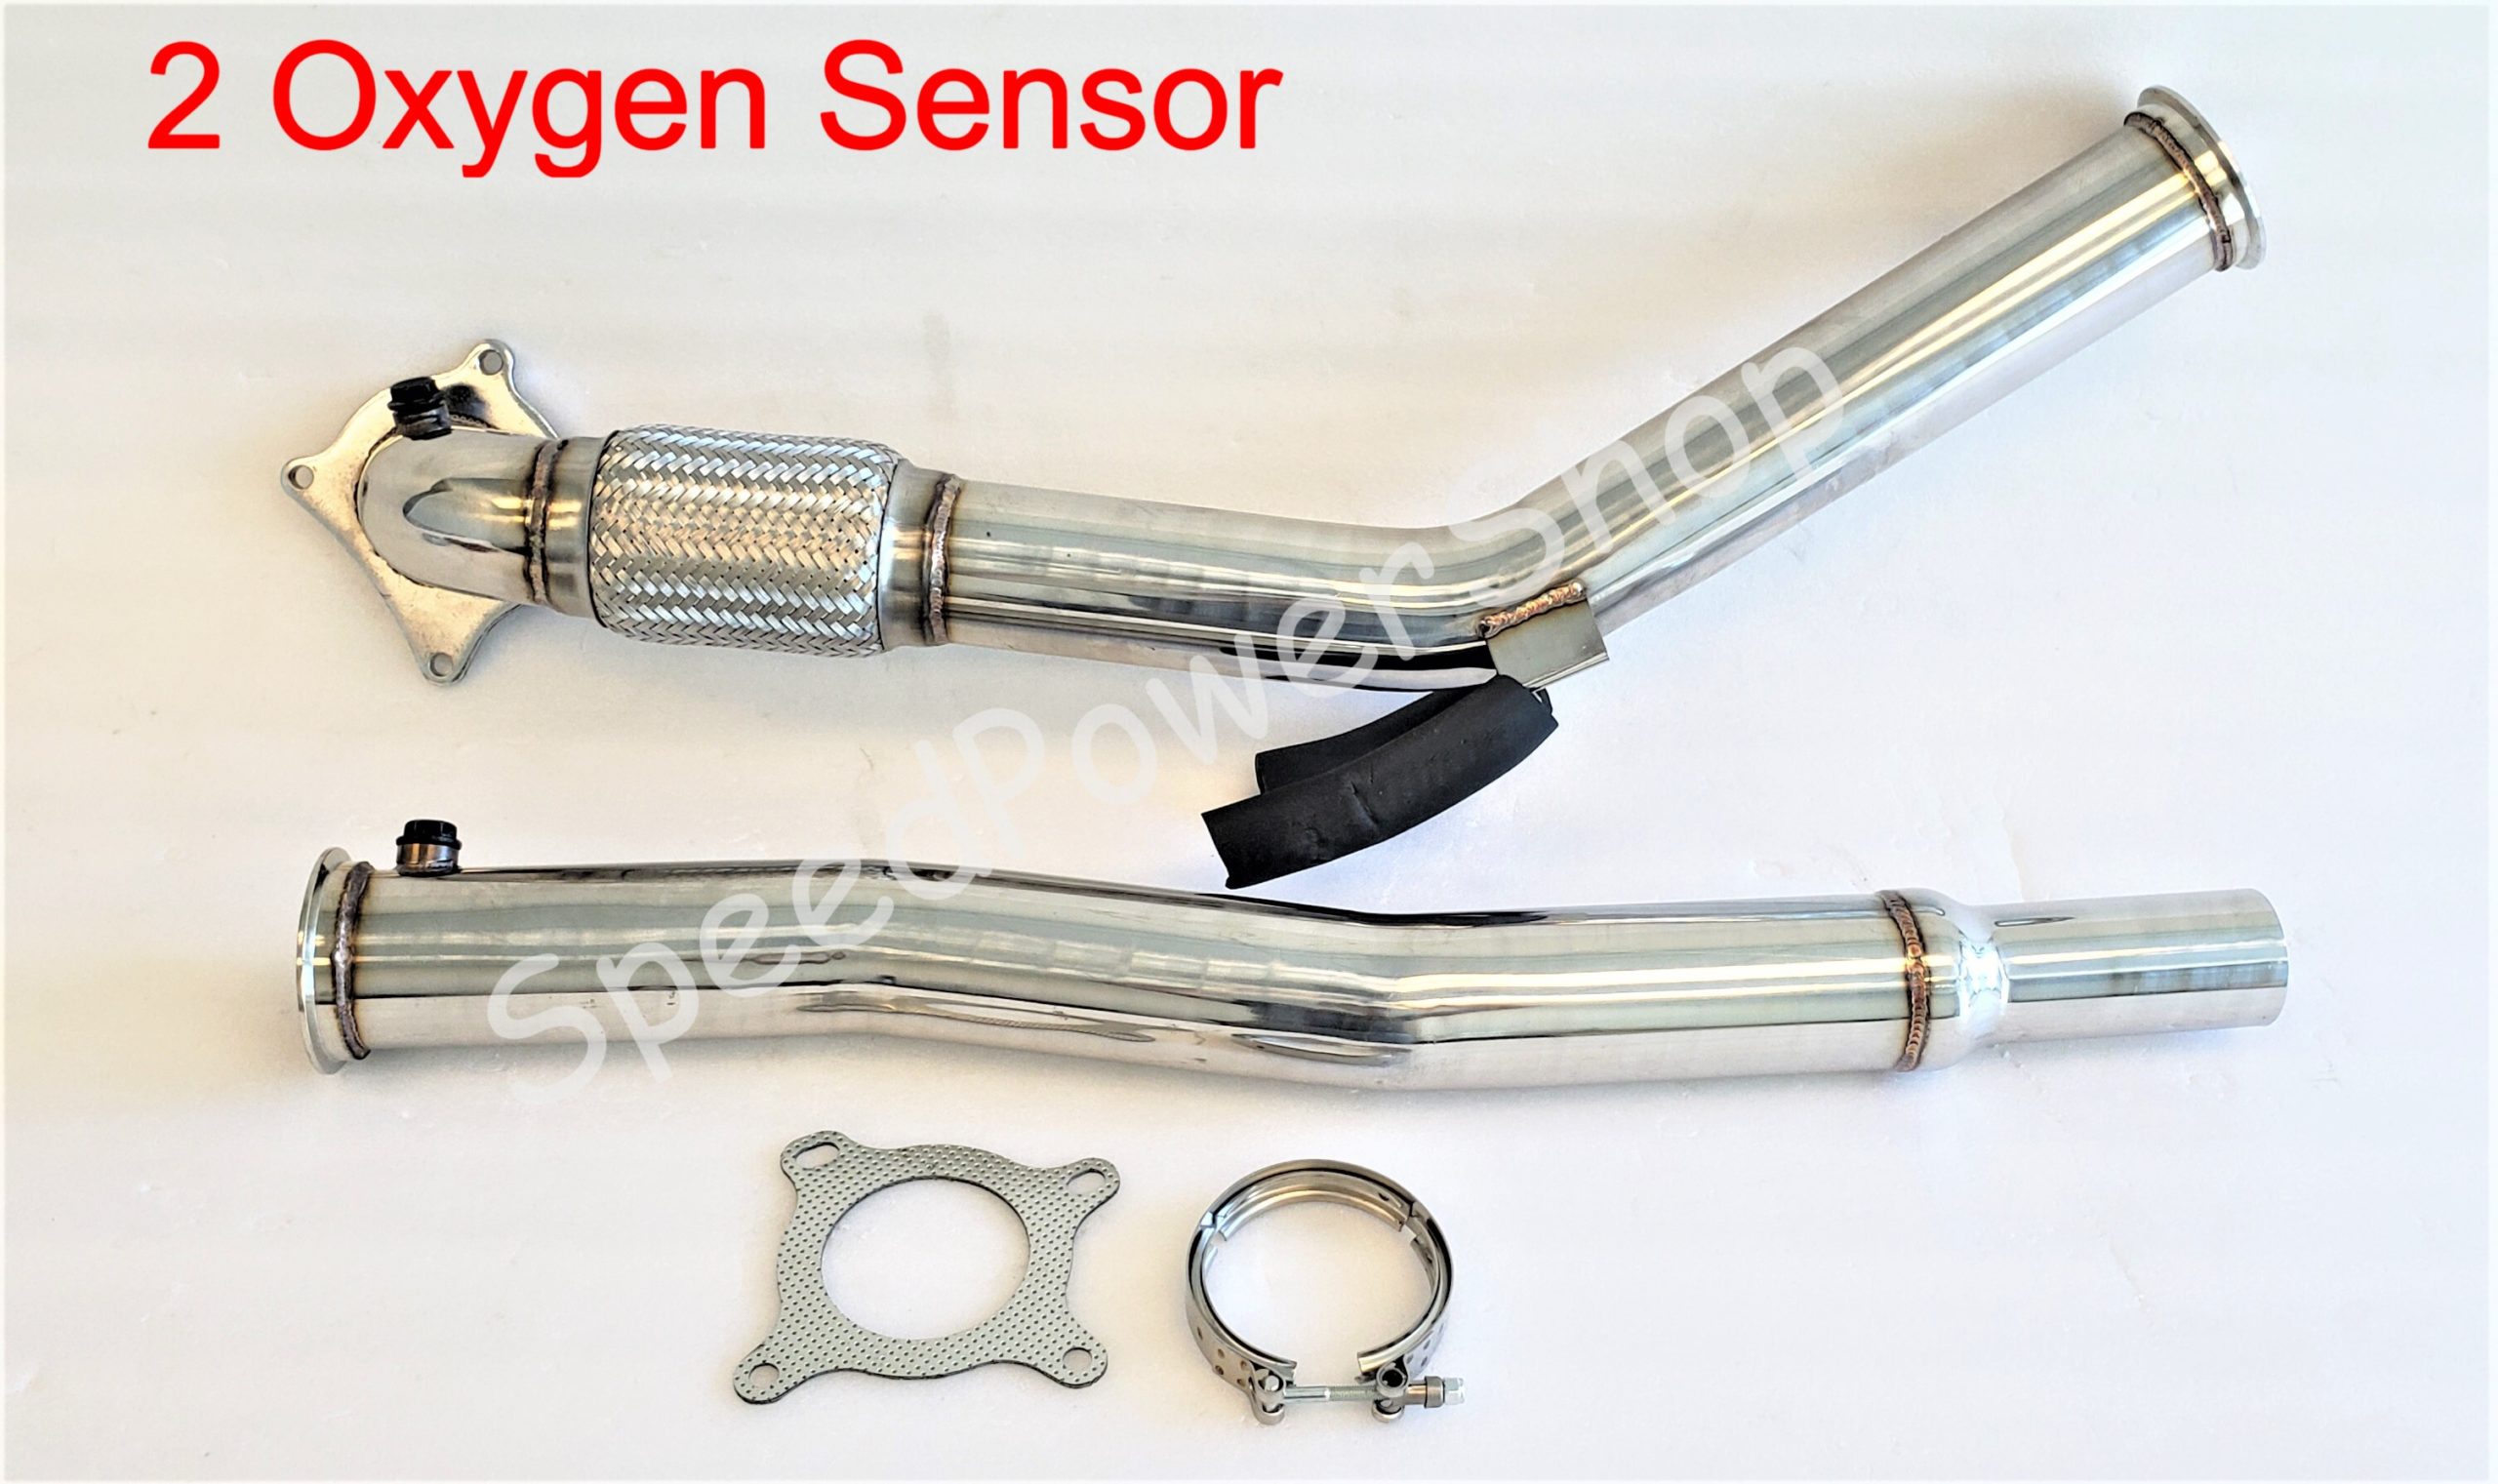 DNA MOTORING DP-A3-T Turbo Exhaust Downpipe Kit for 06-11 Audi A3/VW Jetta GTI MK5